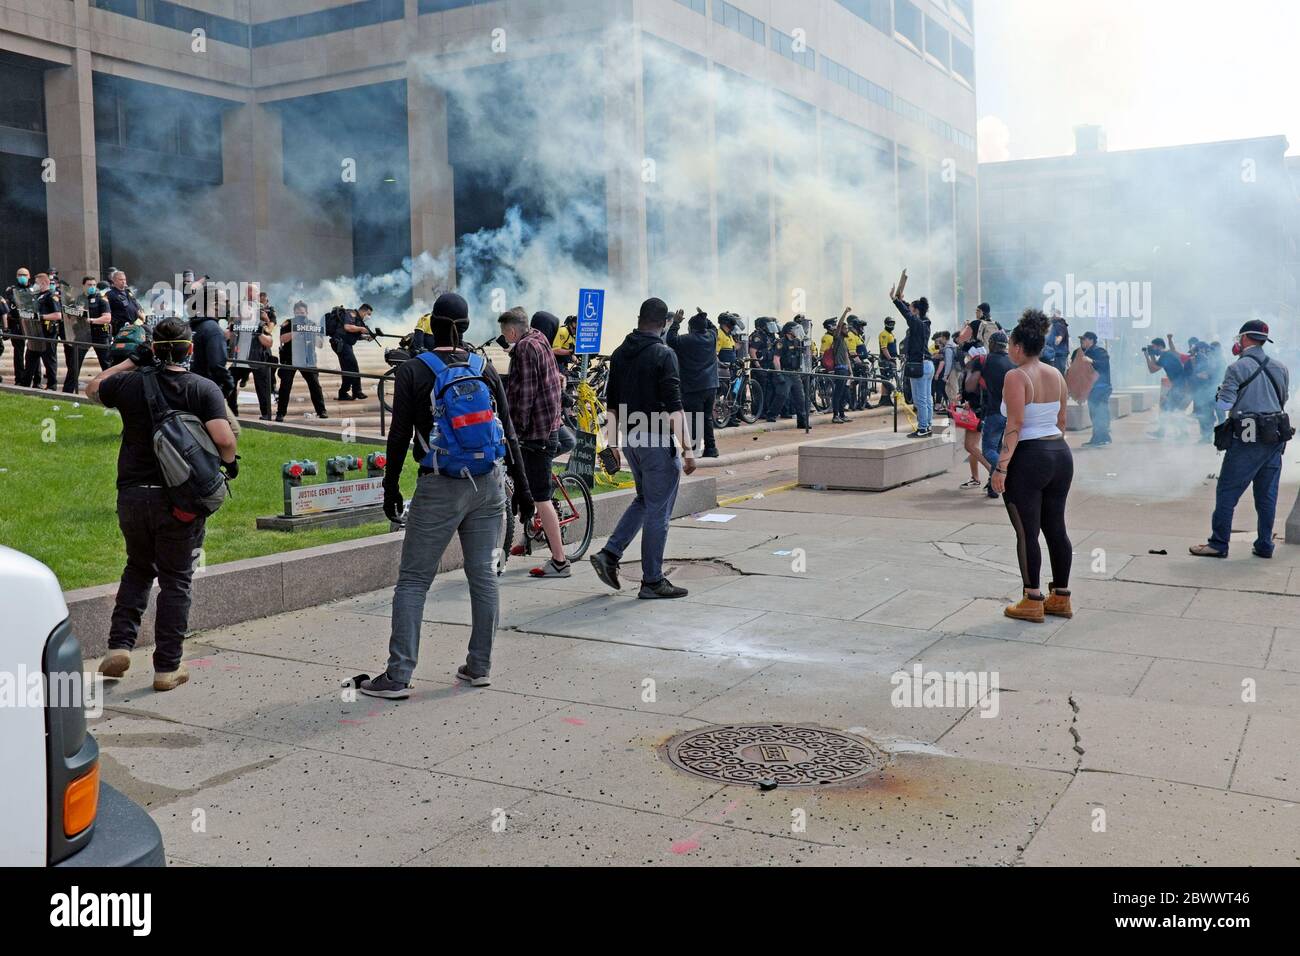 Tear gas fills the air in front of the Cleveland Justice Center where protesters against the killing of George Floyd gathered to demonstrate.  Thousands of protesters descended upon the Cleveland Justice Center, home of the Cleveland Police Headquarters, in downtown Cleveland, Ohio, USA where tear gas and pepper spray were used by the police to try and control the crowd.  Downtown Cleveland was filled with protesters and as the day progressed so did the looting, vandalism, and lawlessness on May 30, 2020. Stock Photo